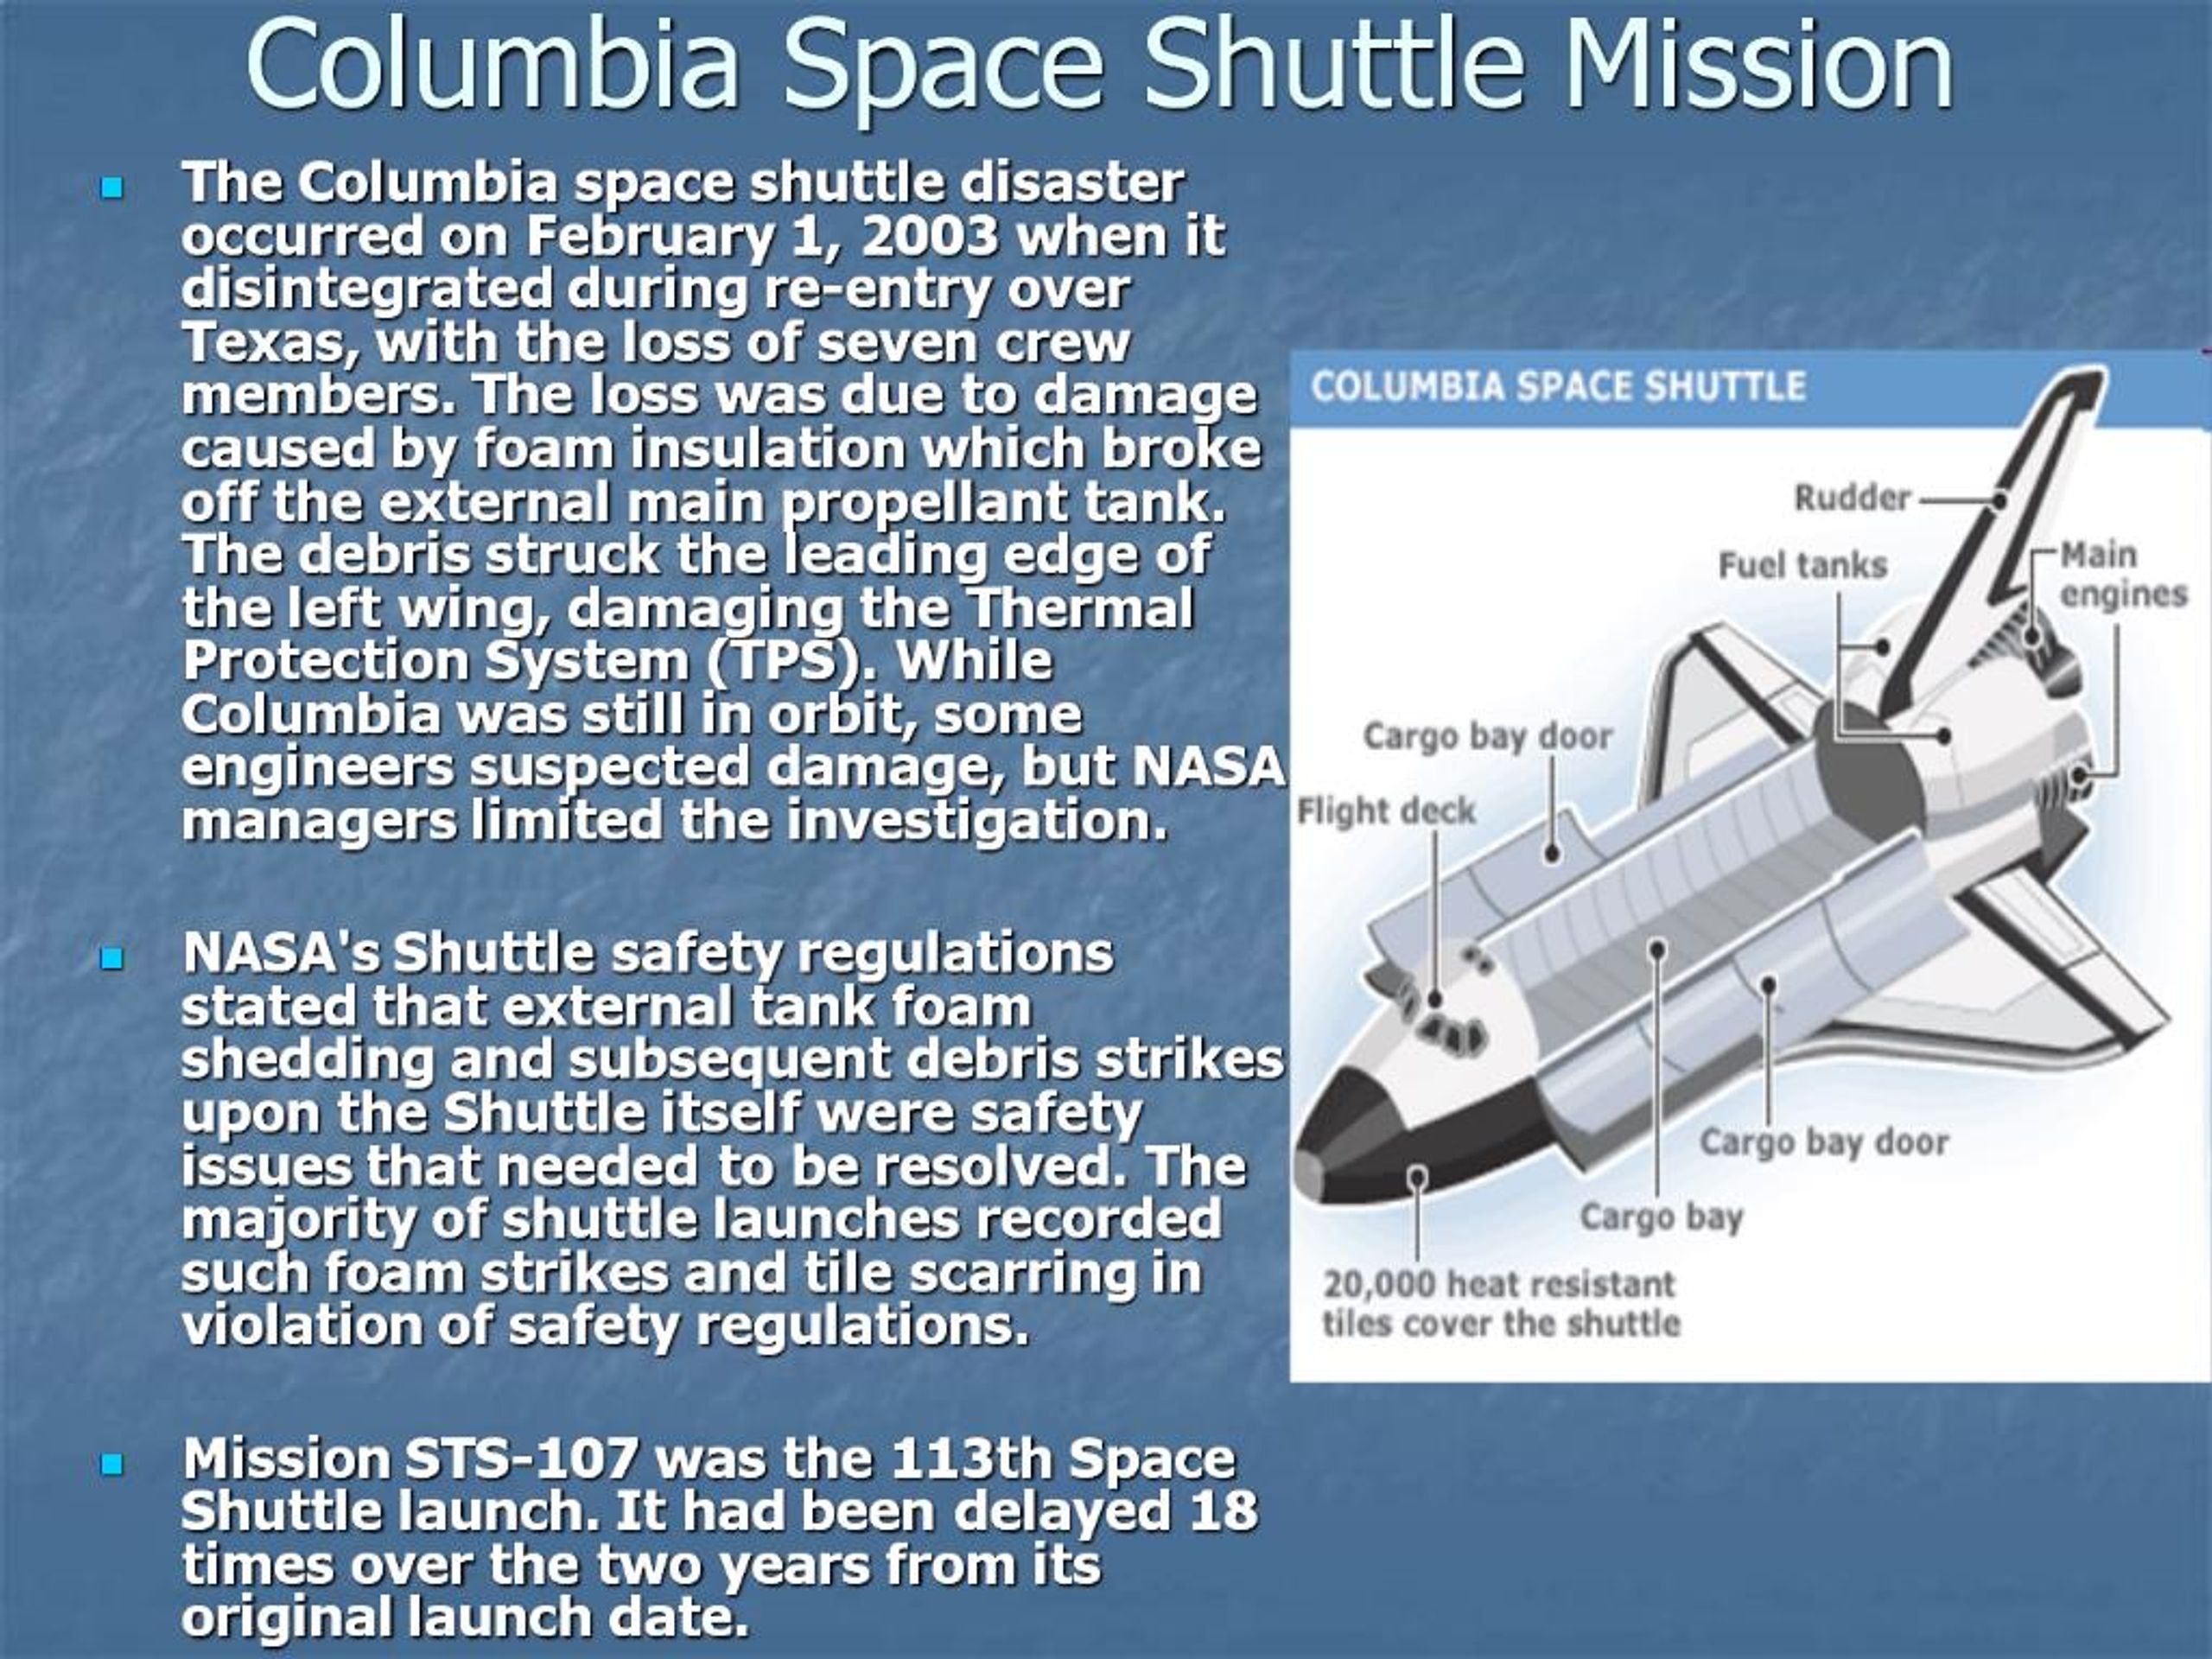 PPT - Columbia Space Shuttle Mission STS-107 PowerPoint Presentation, free download - ID:758740